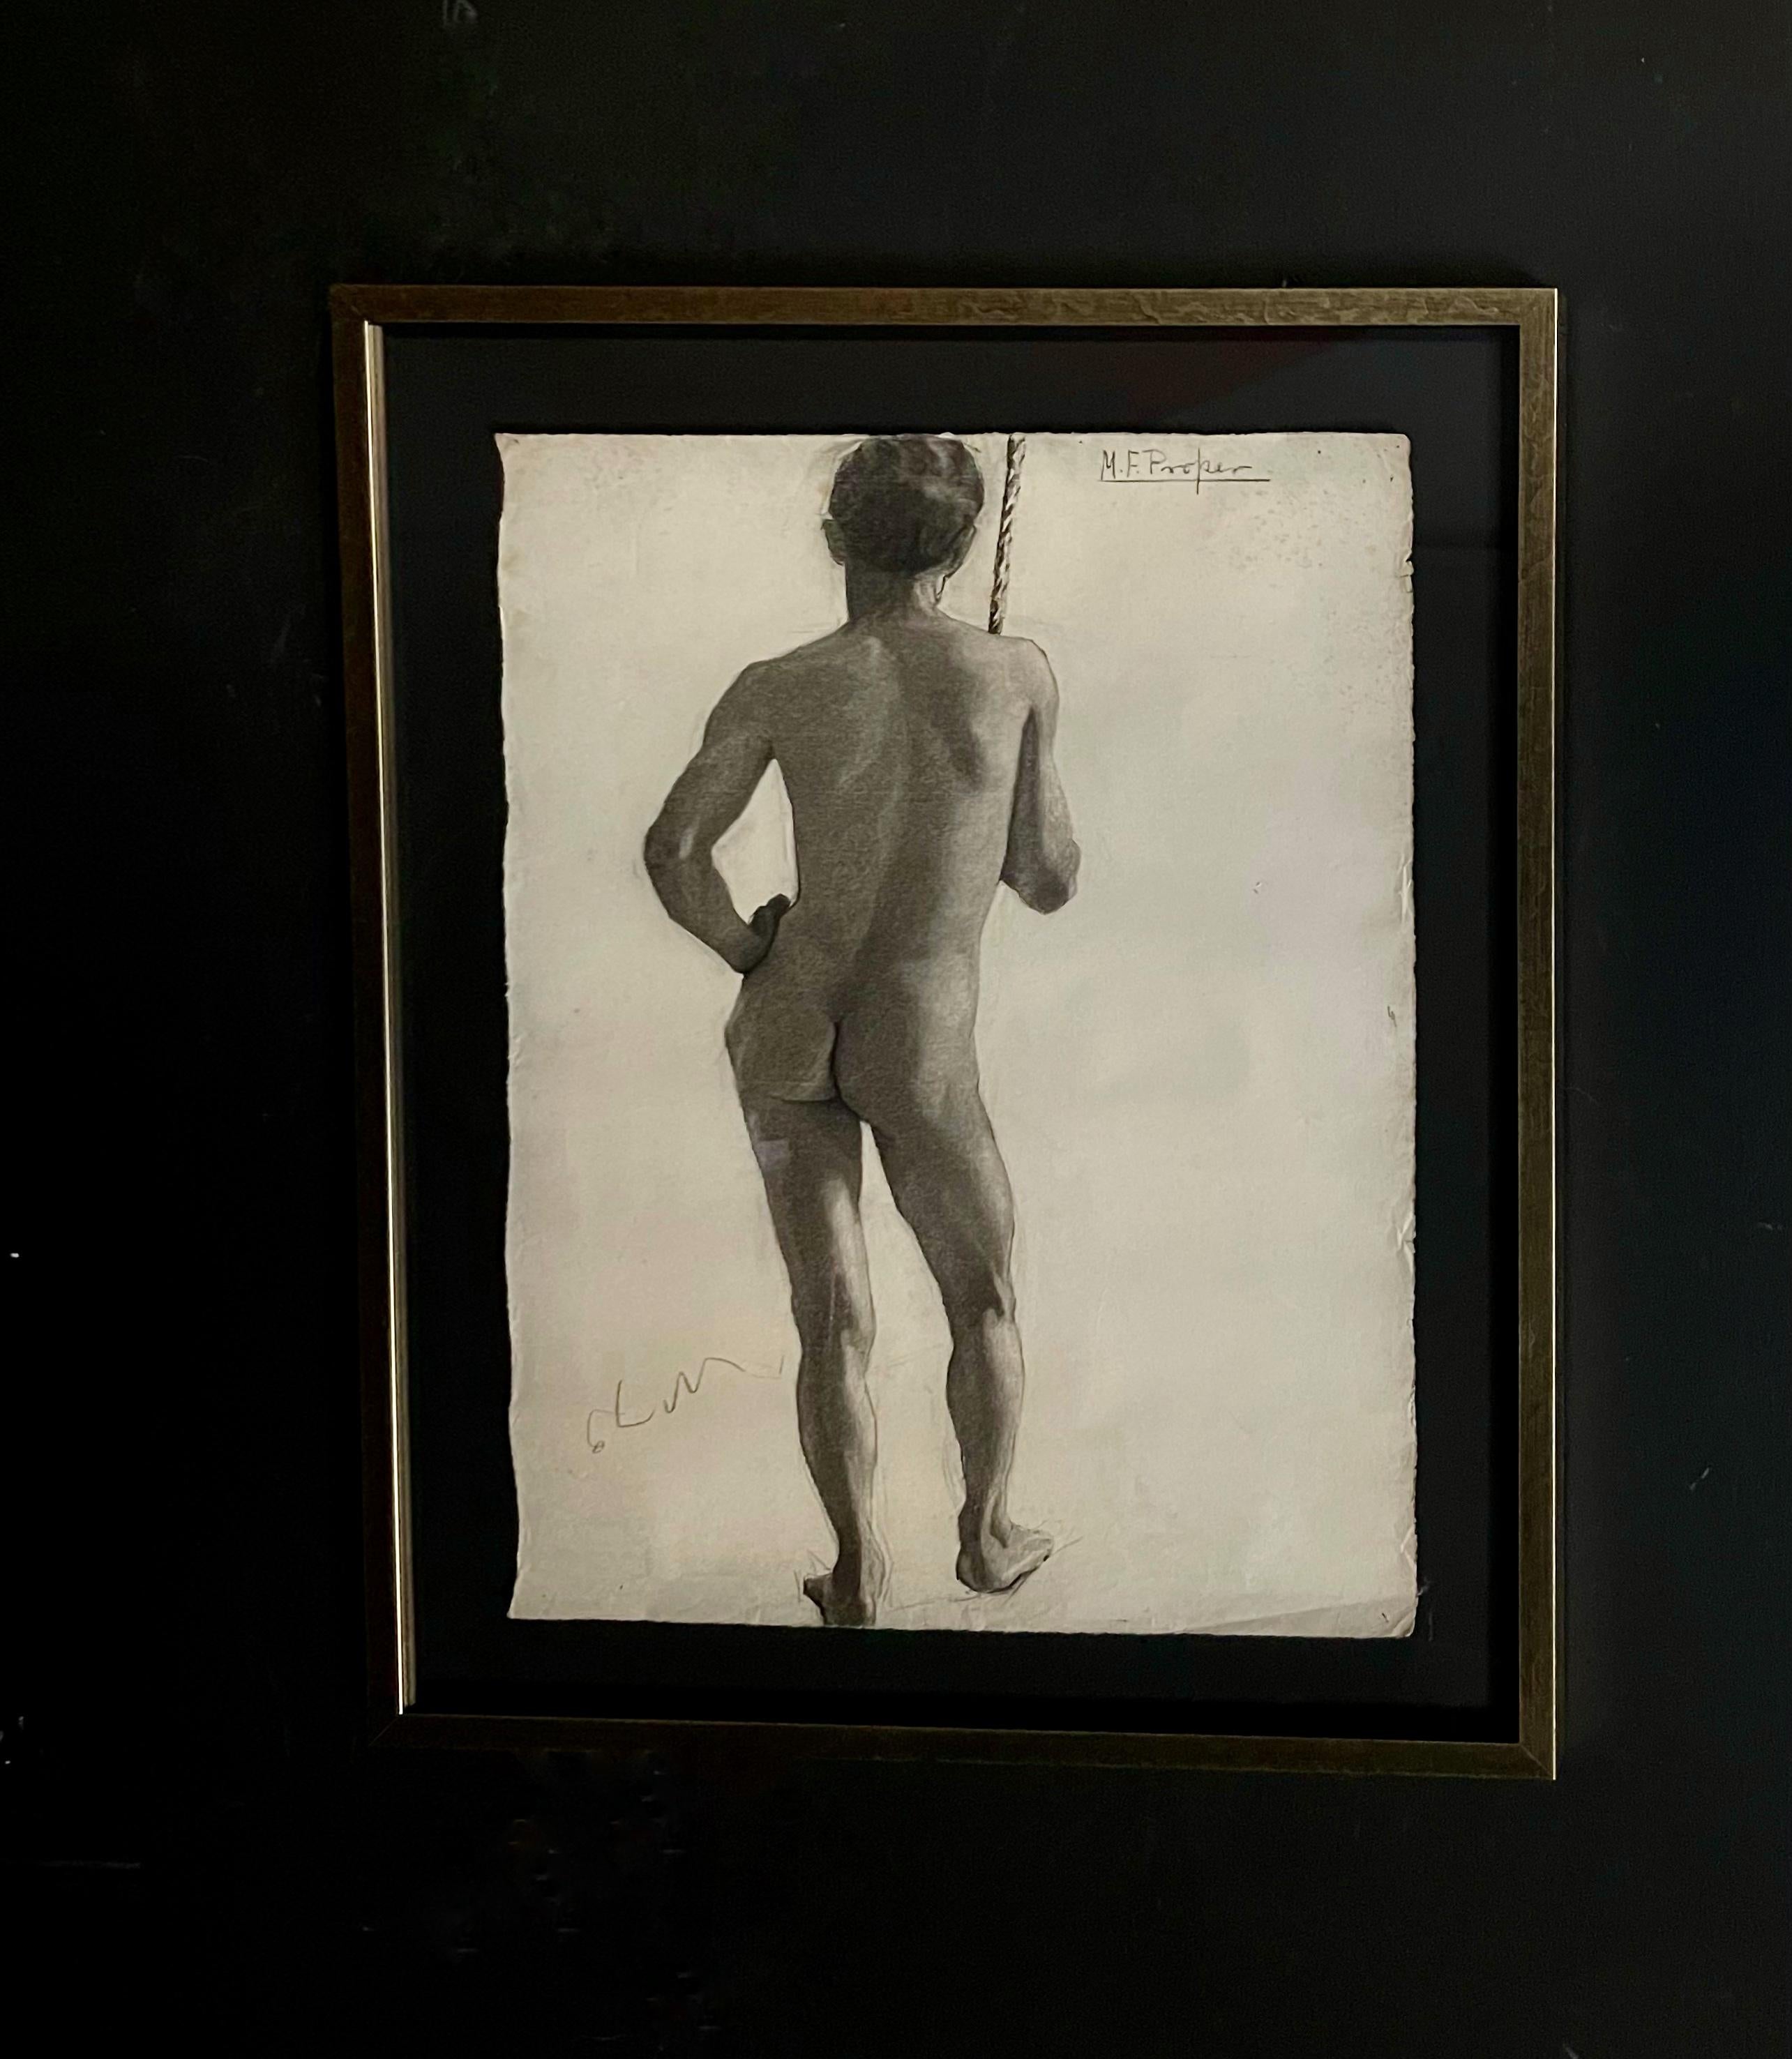 Larger than usual. Antique Charcoal Nude Study Drawing. Newly framed and museum mounted. Part of a collection of 6. Five nude drawings, and one portrait. (Please see other listings. We have these listed separately.) Believed to be from the turn of